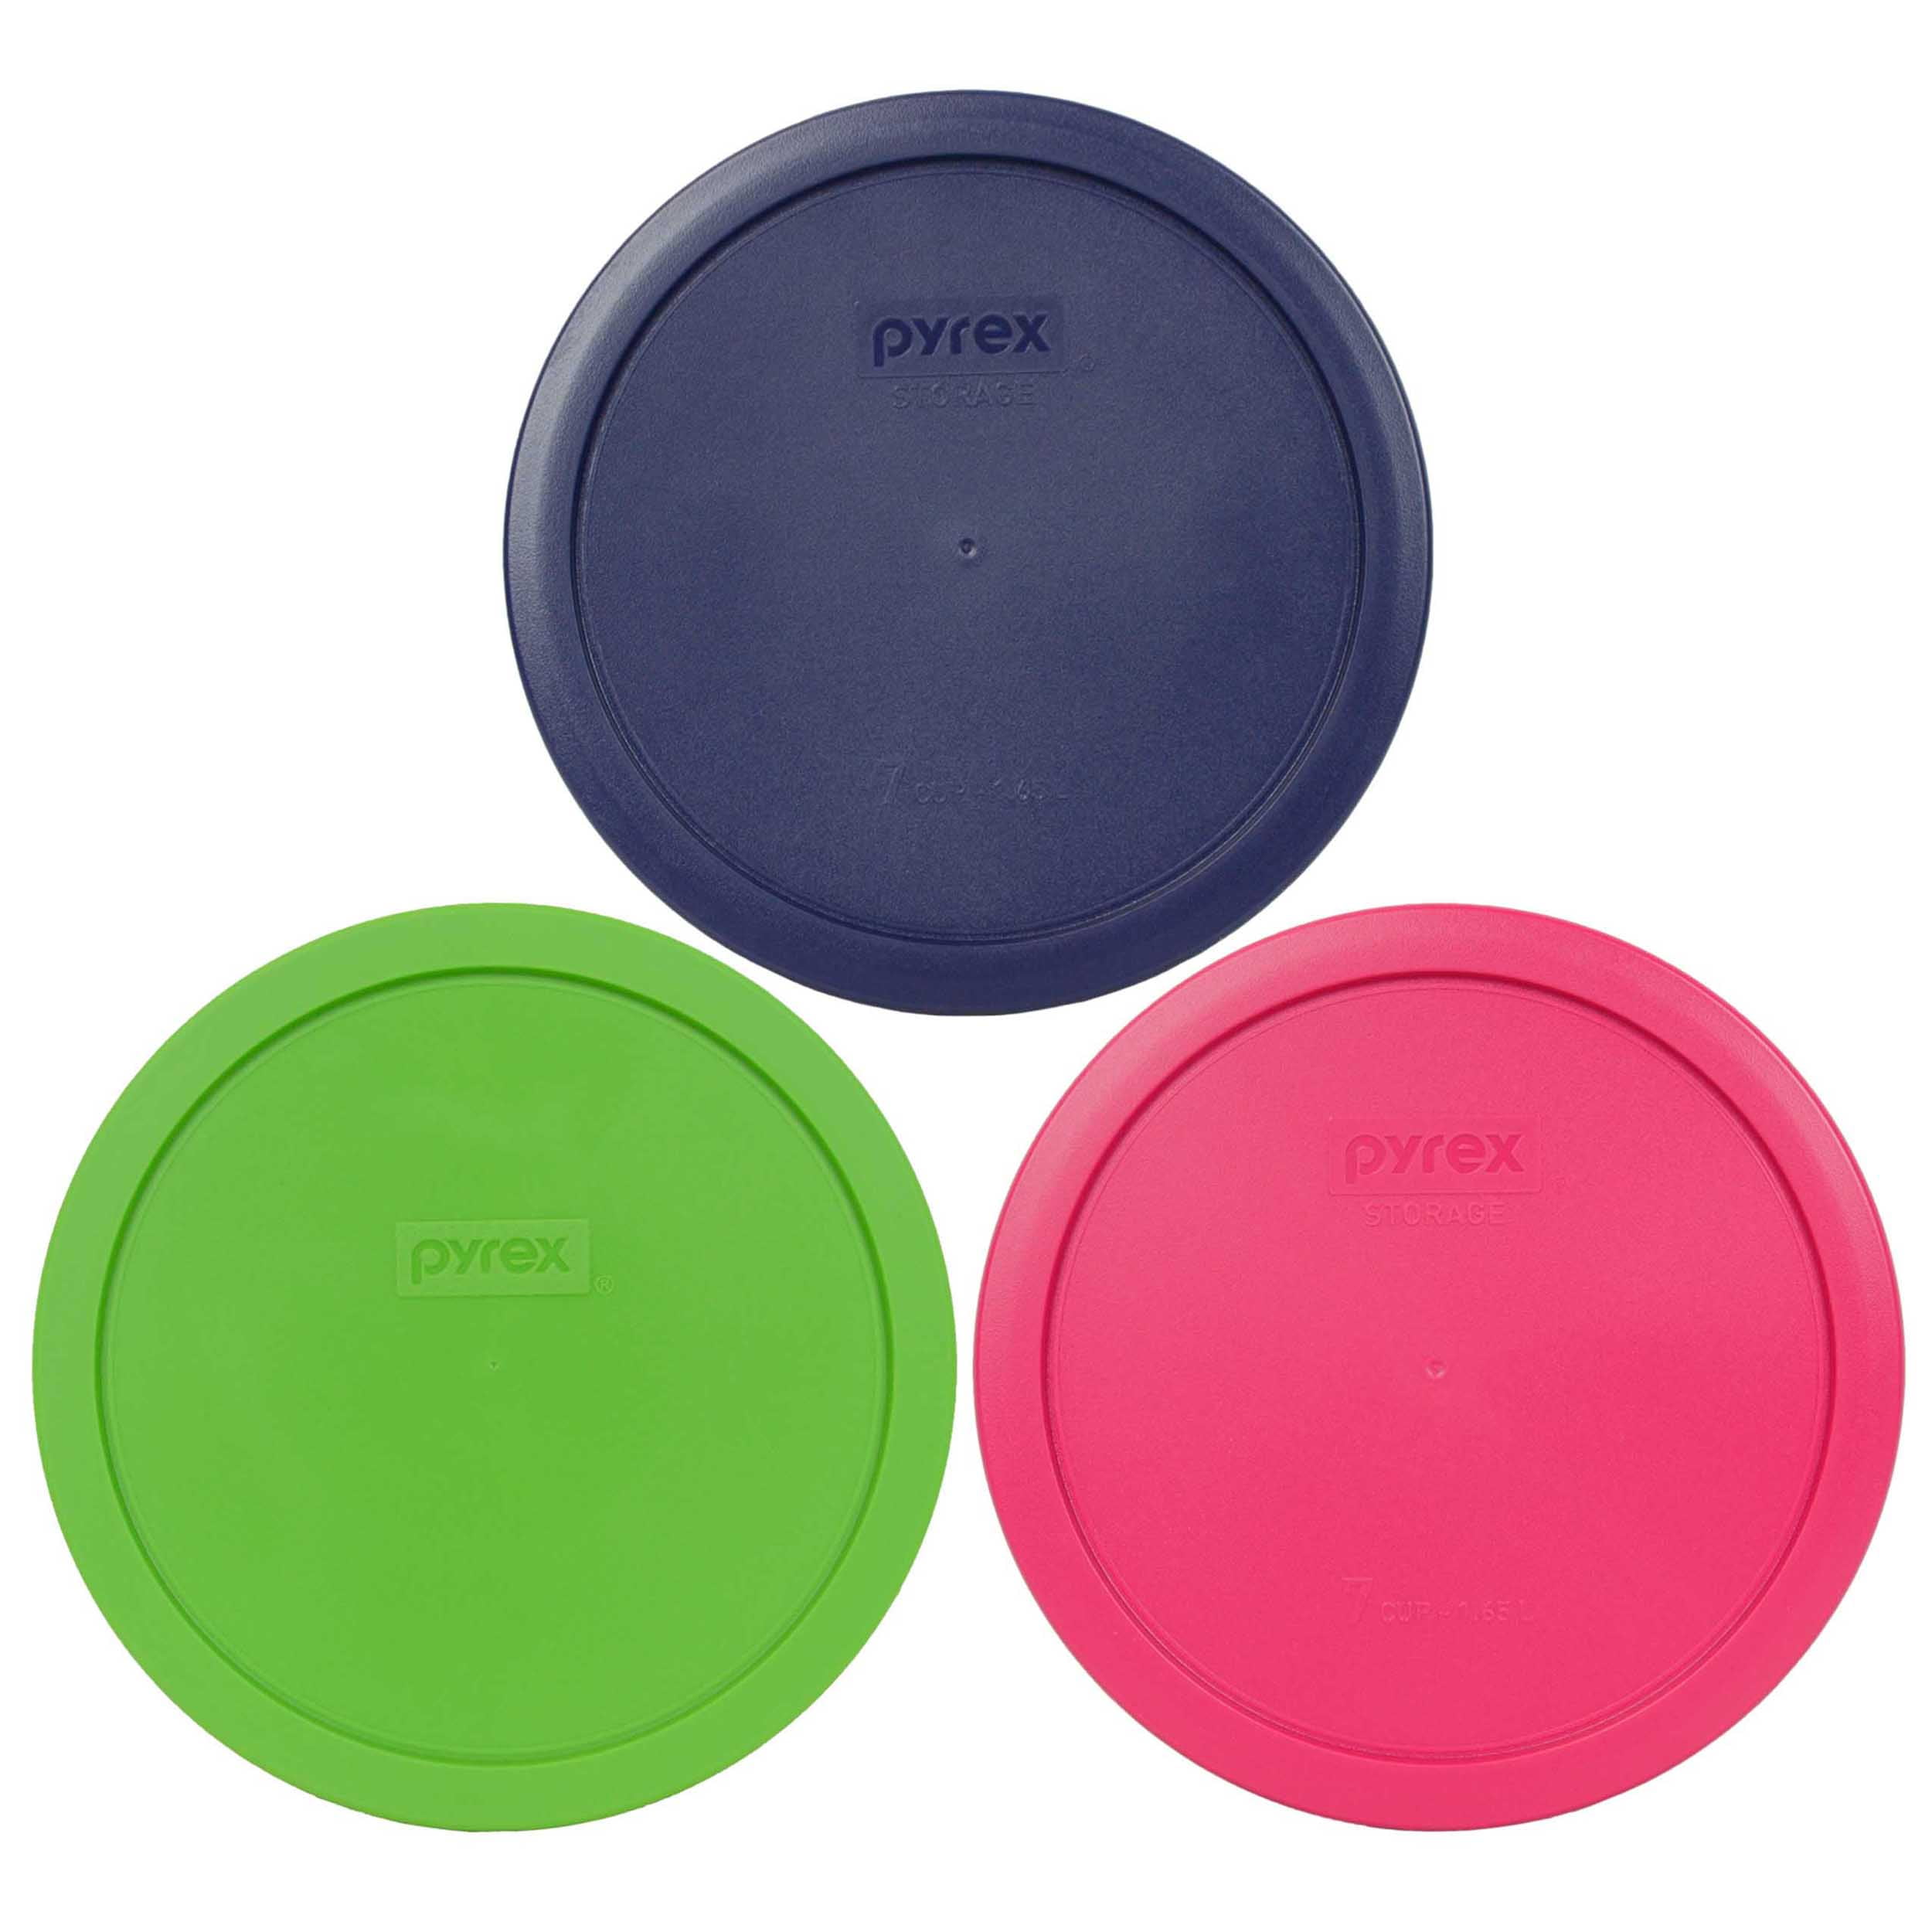 Pyrex 7402-PC Round 6/7 Cup Storage Lid for Glass Bowls 4, Green 